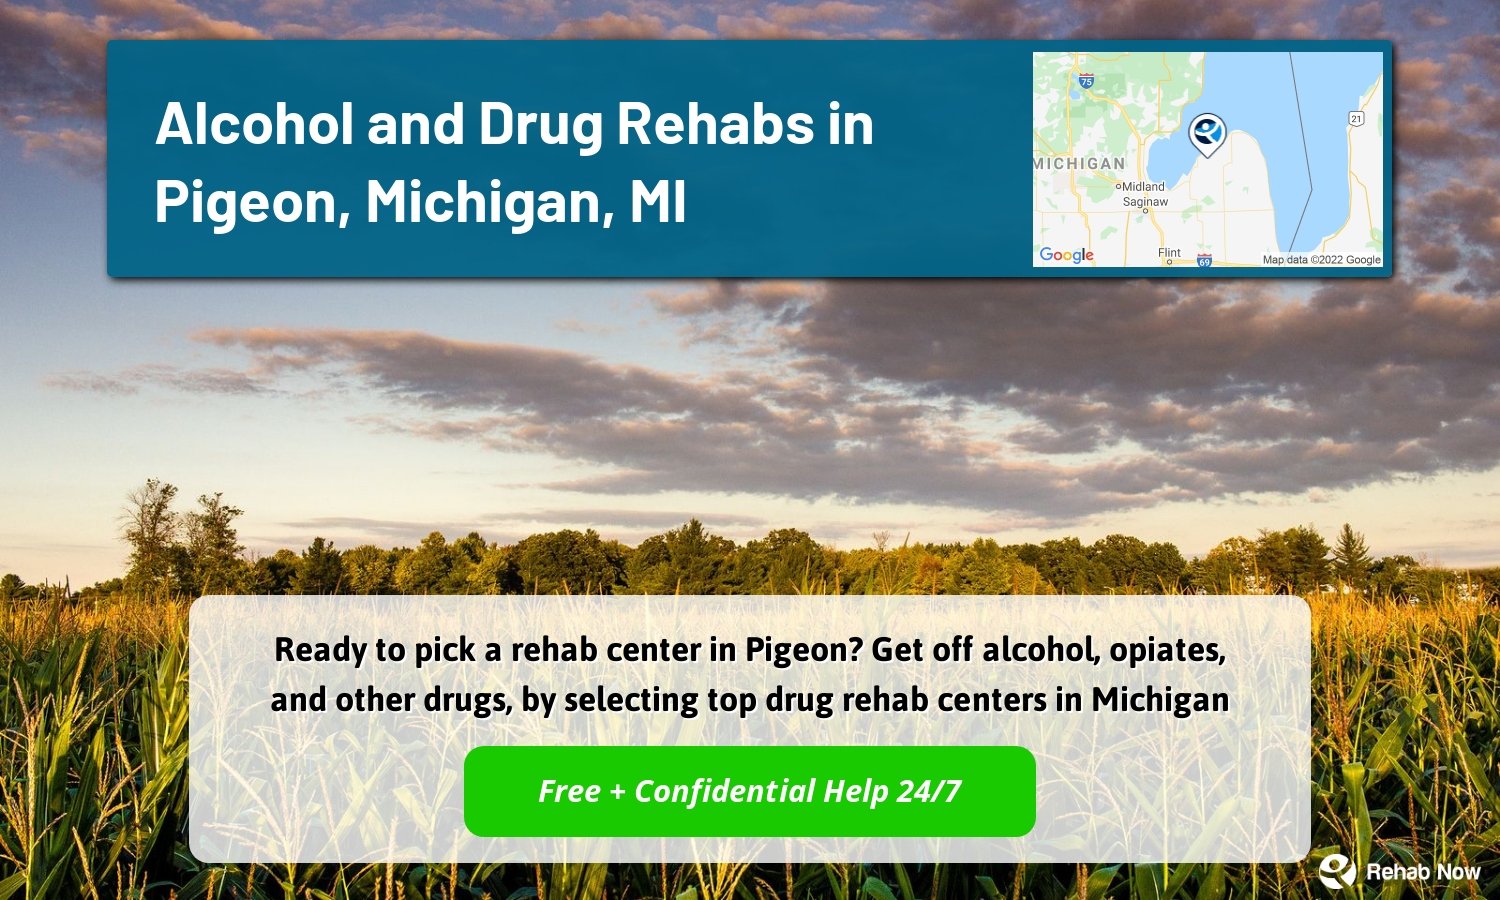 Ready to pick a rehab center in Pigeon? Get off alcohol, opiates, and other drugs, by selecting top drug rehab centers in Michigan